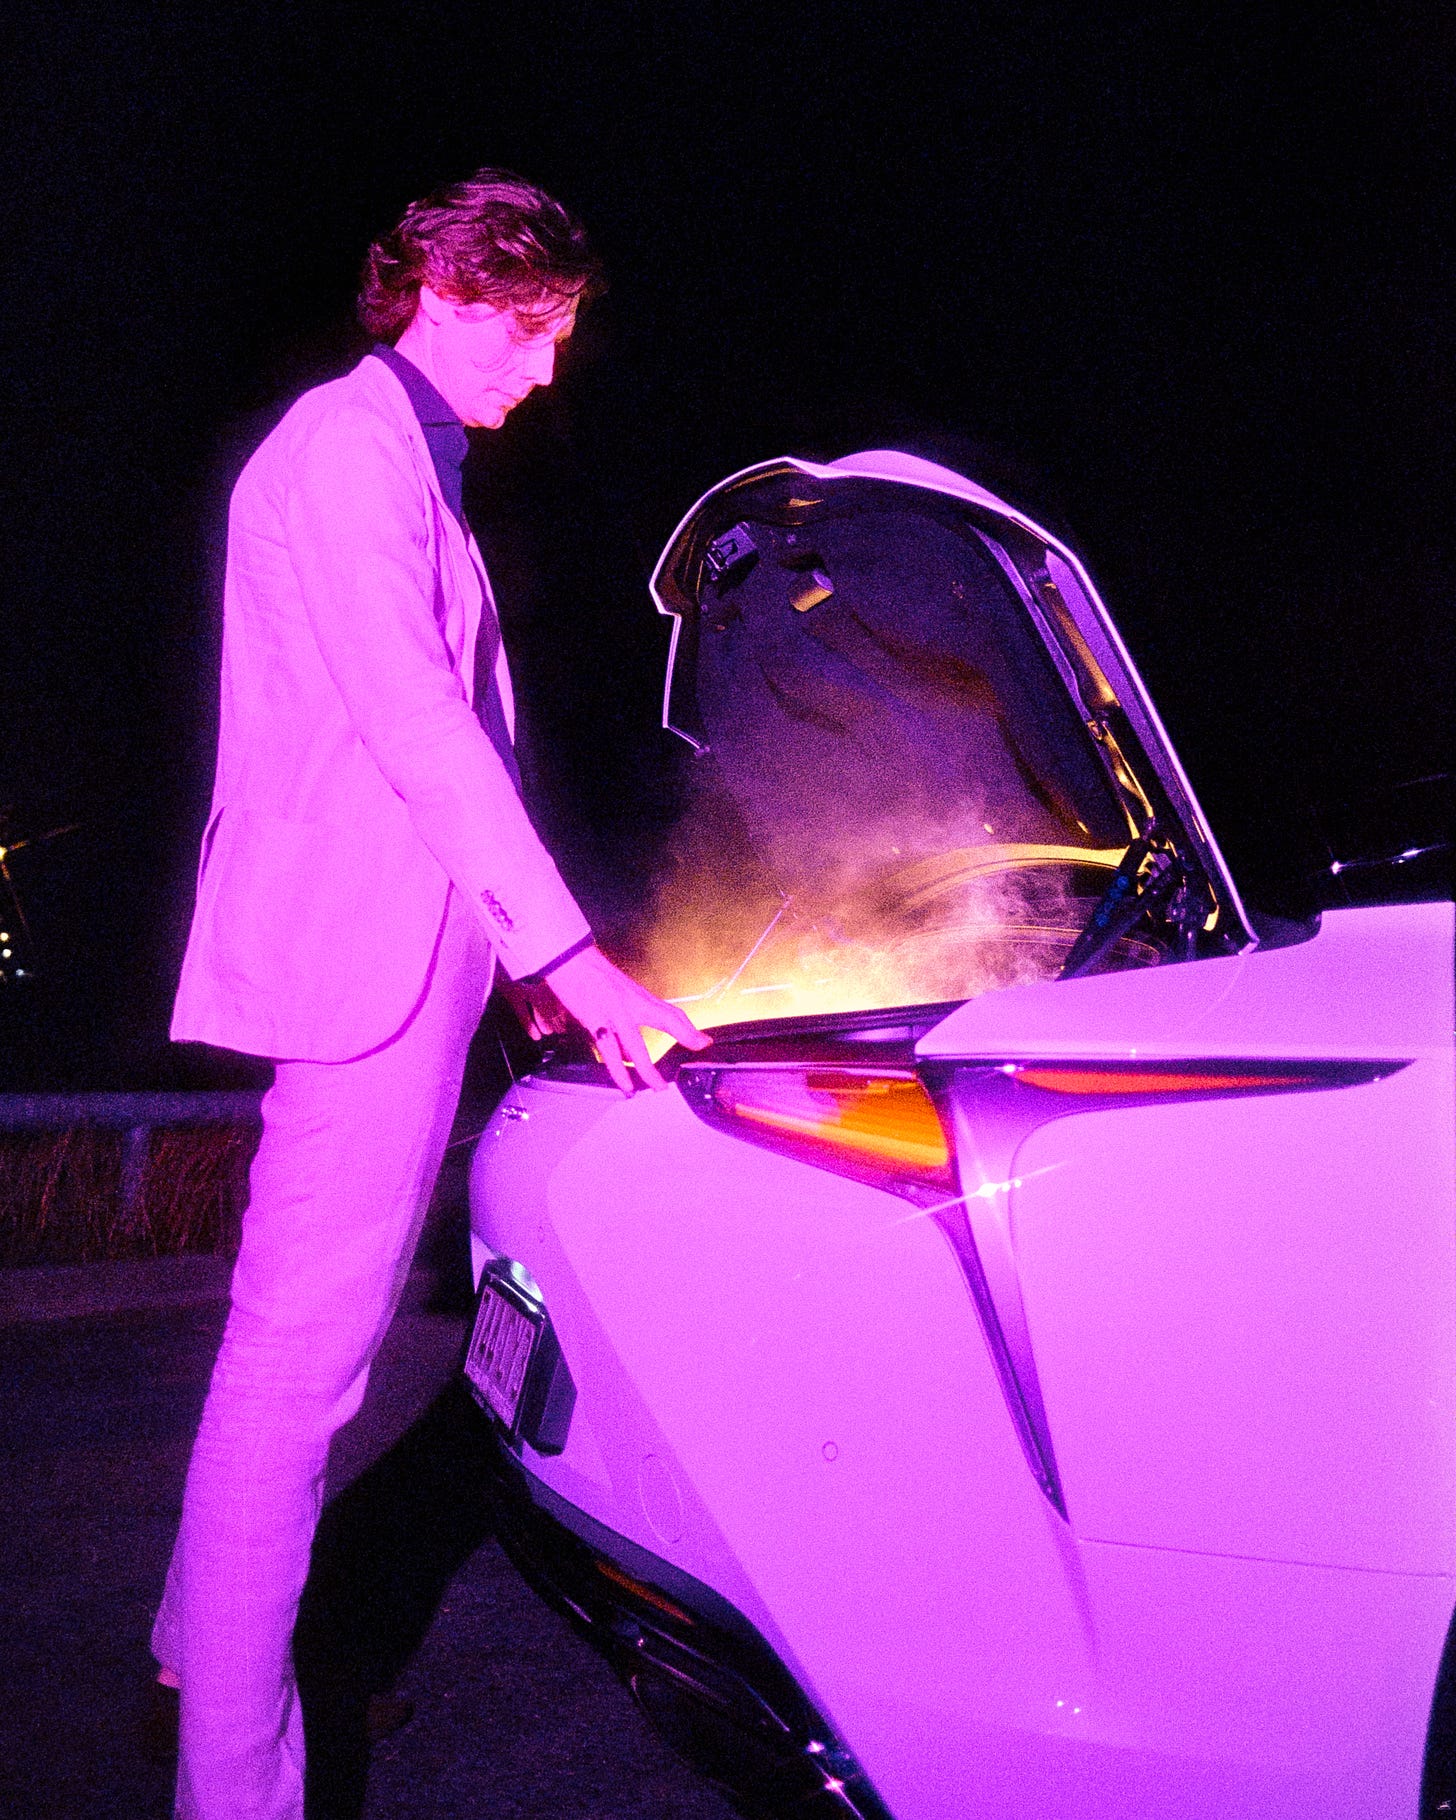 A very pink/purple image of Clem opening the boot of his car to reveal a puff of smoke